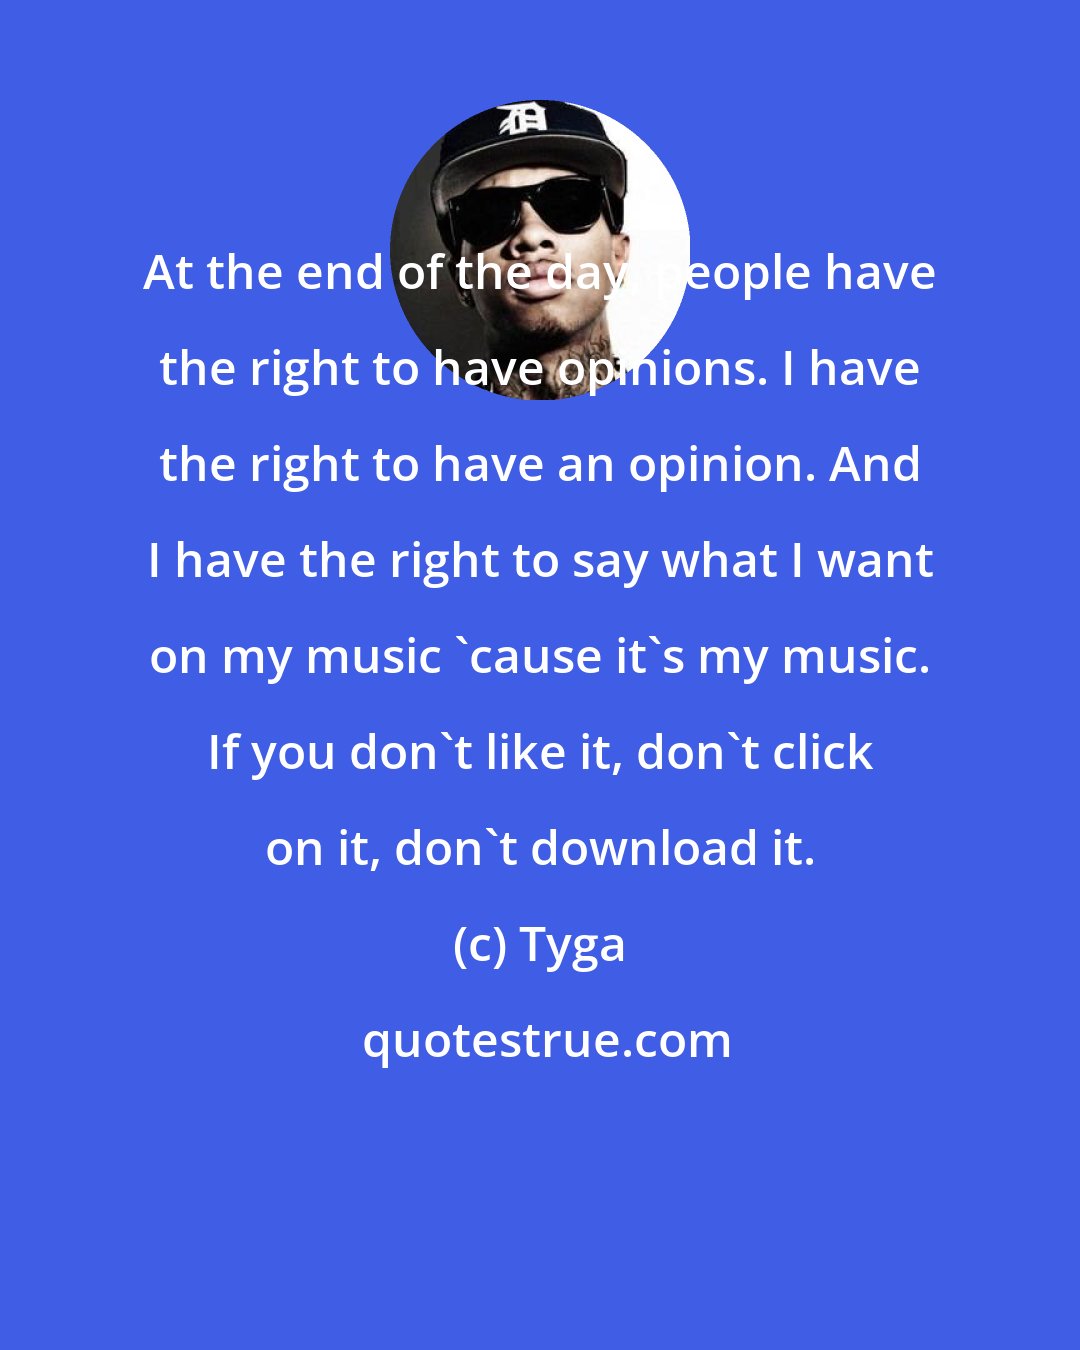 Tyga: At the end of the day, people have the right to have opinions. I have the right to have an opinion. And I have the right to say what I want on my music 'cause it's my music. If you don't like it, don't click on it, don't download it.